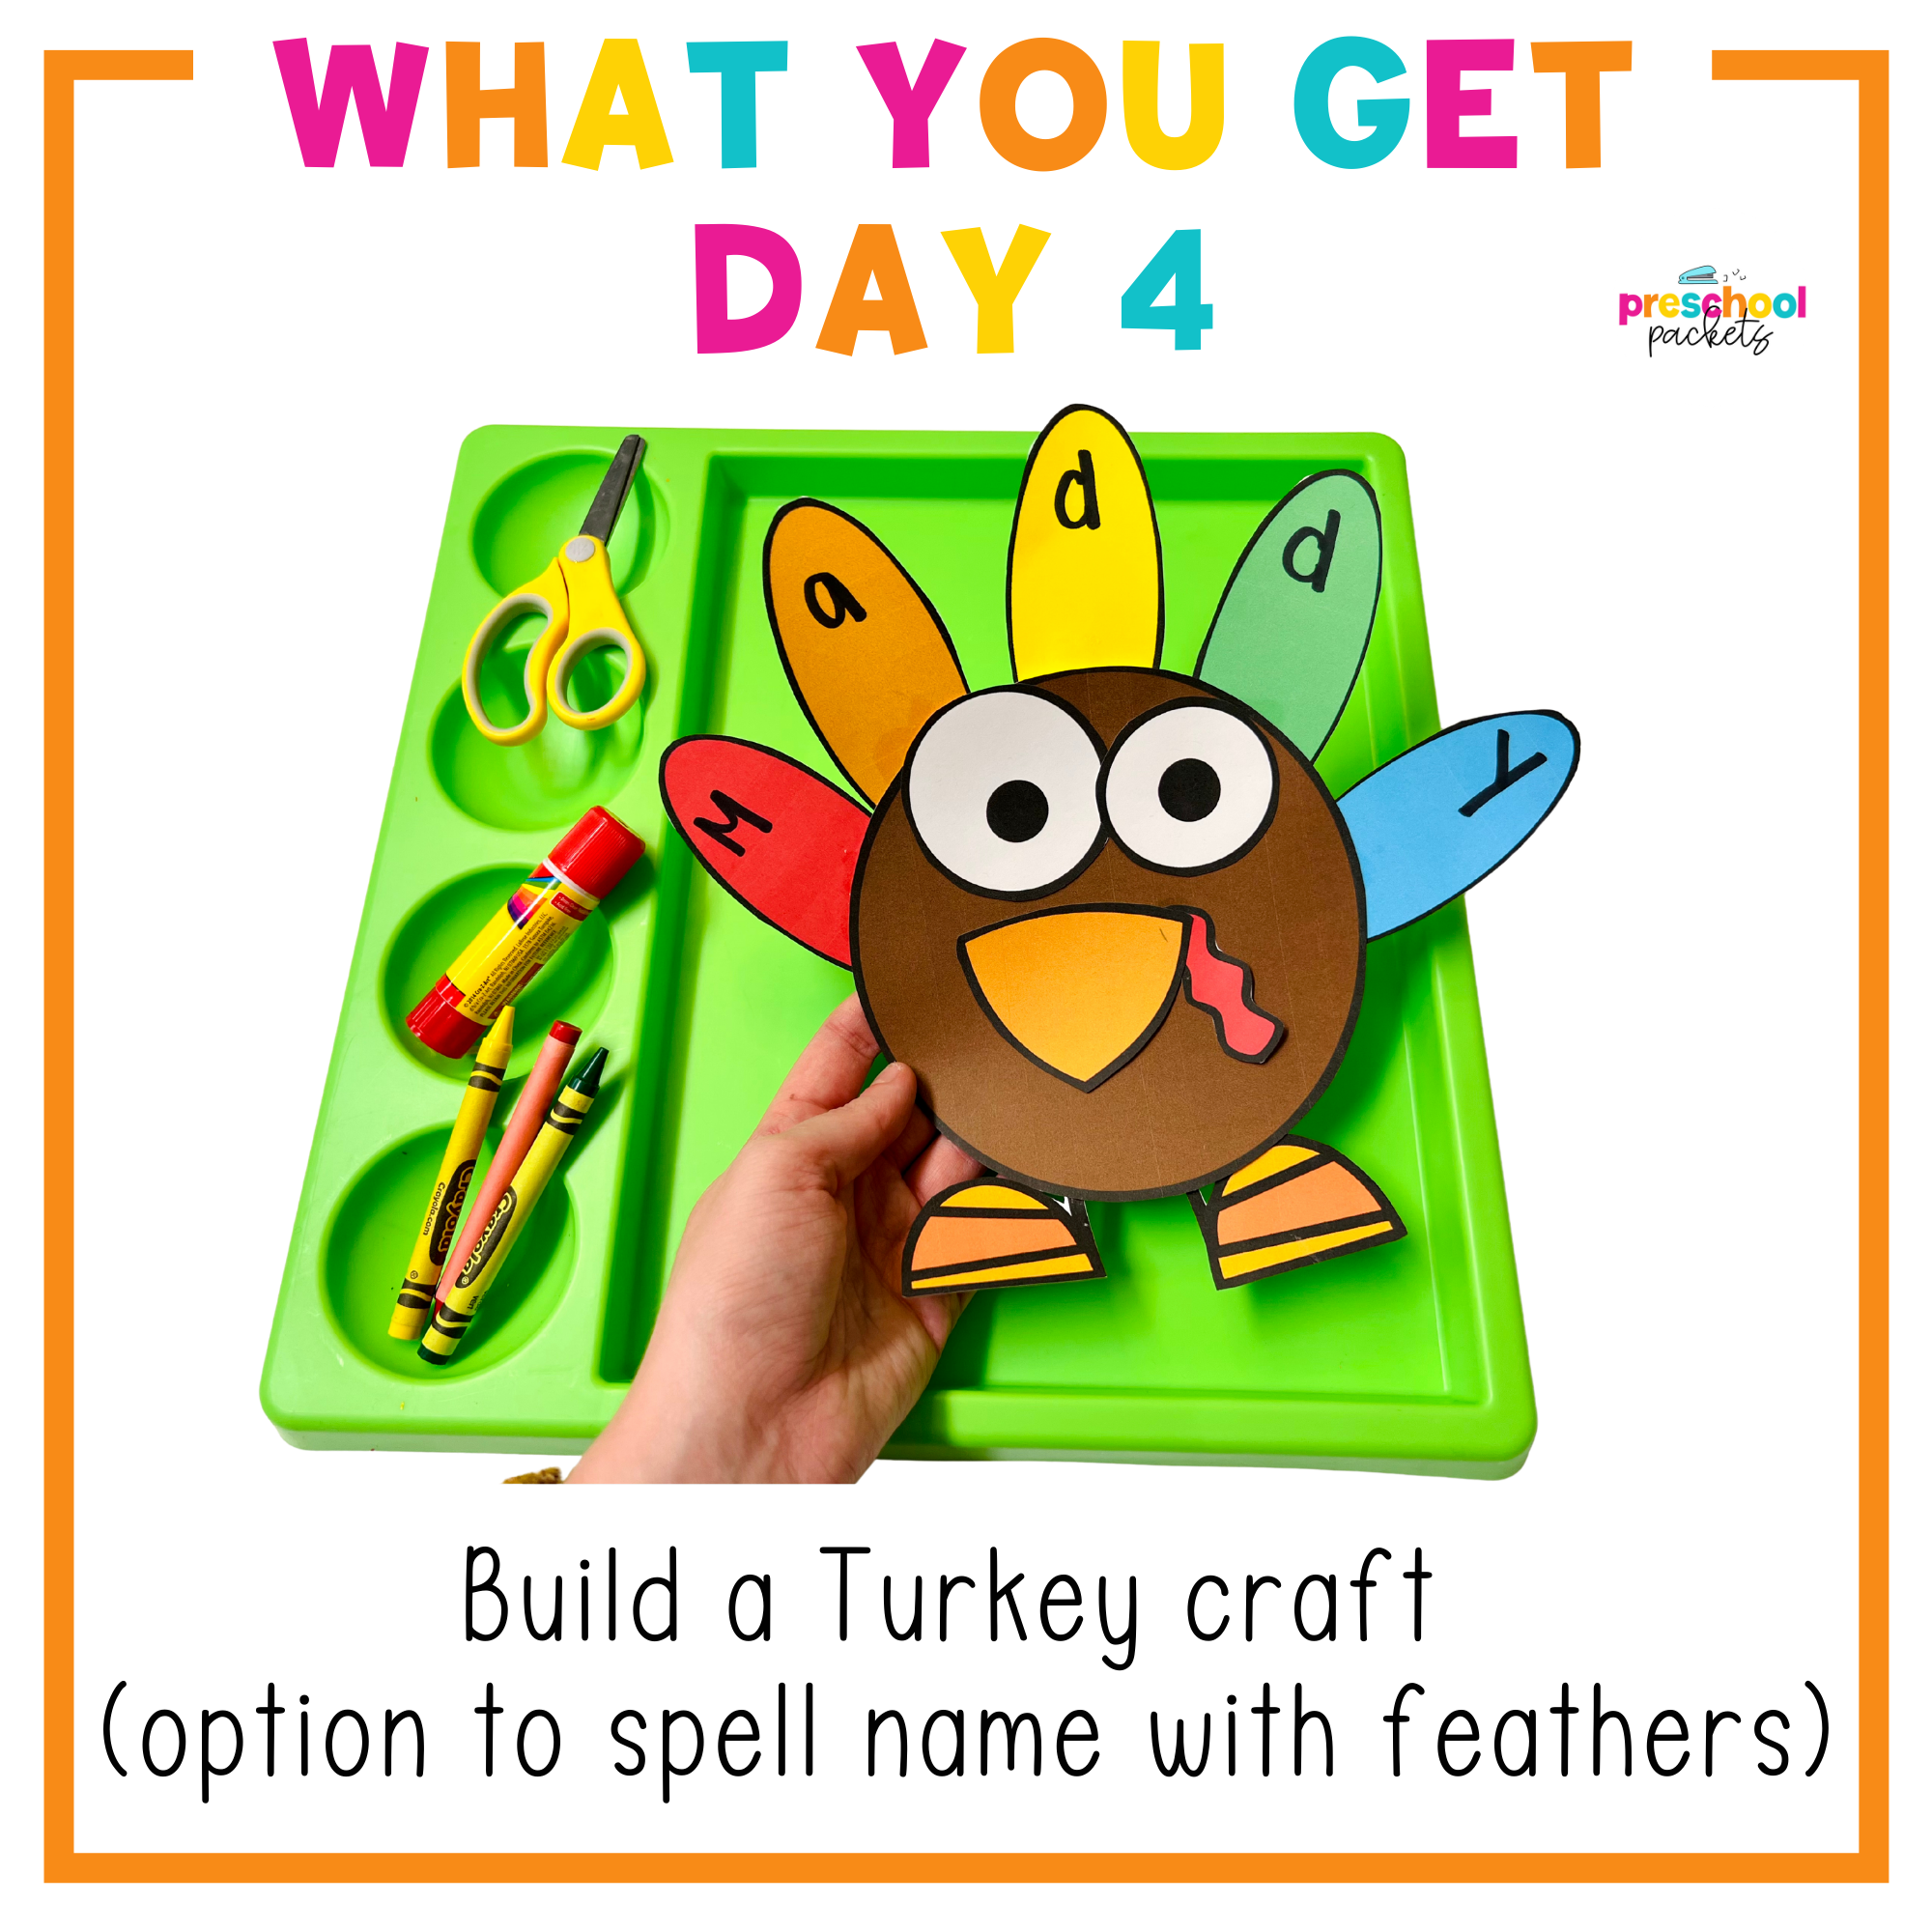 Chef craft idea for kids  Crafts and Worksheets for Preschool